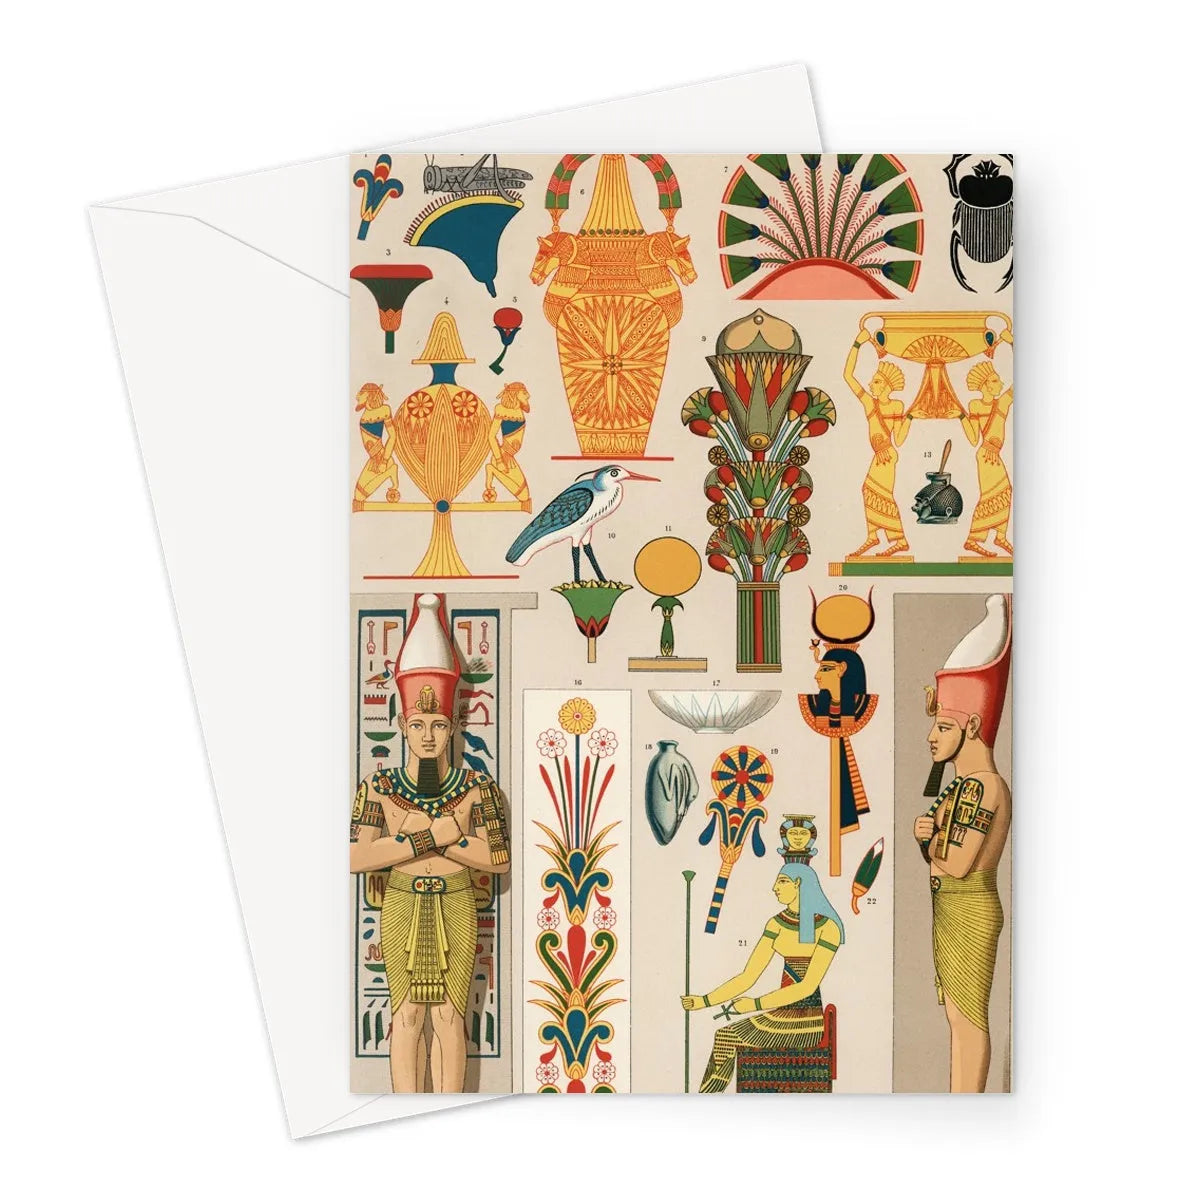 Egyptian Pattern By Auguste Racinet Greeting Card - A5 Portrait / 1 Card - Notebooks & Notepads - Aesthetic Art